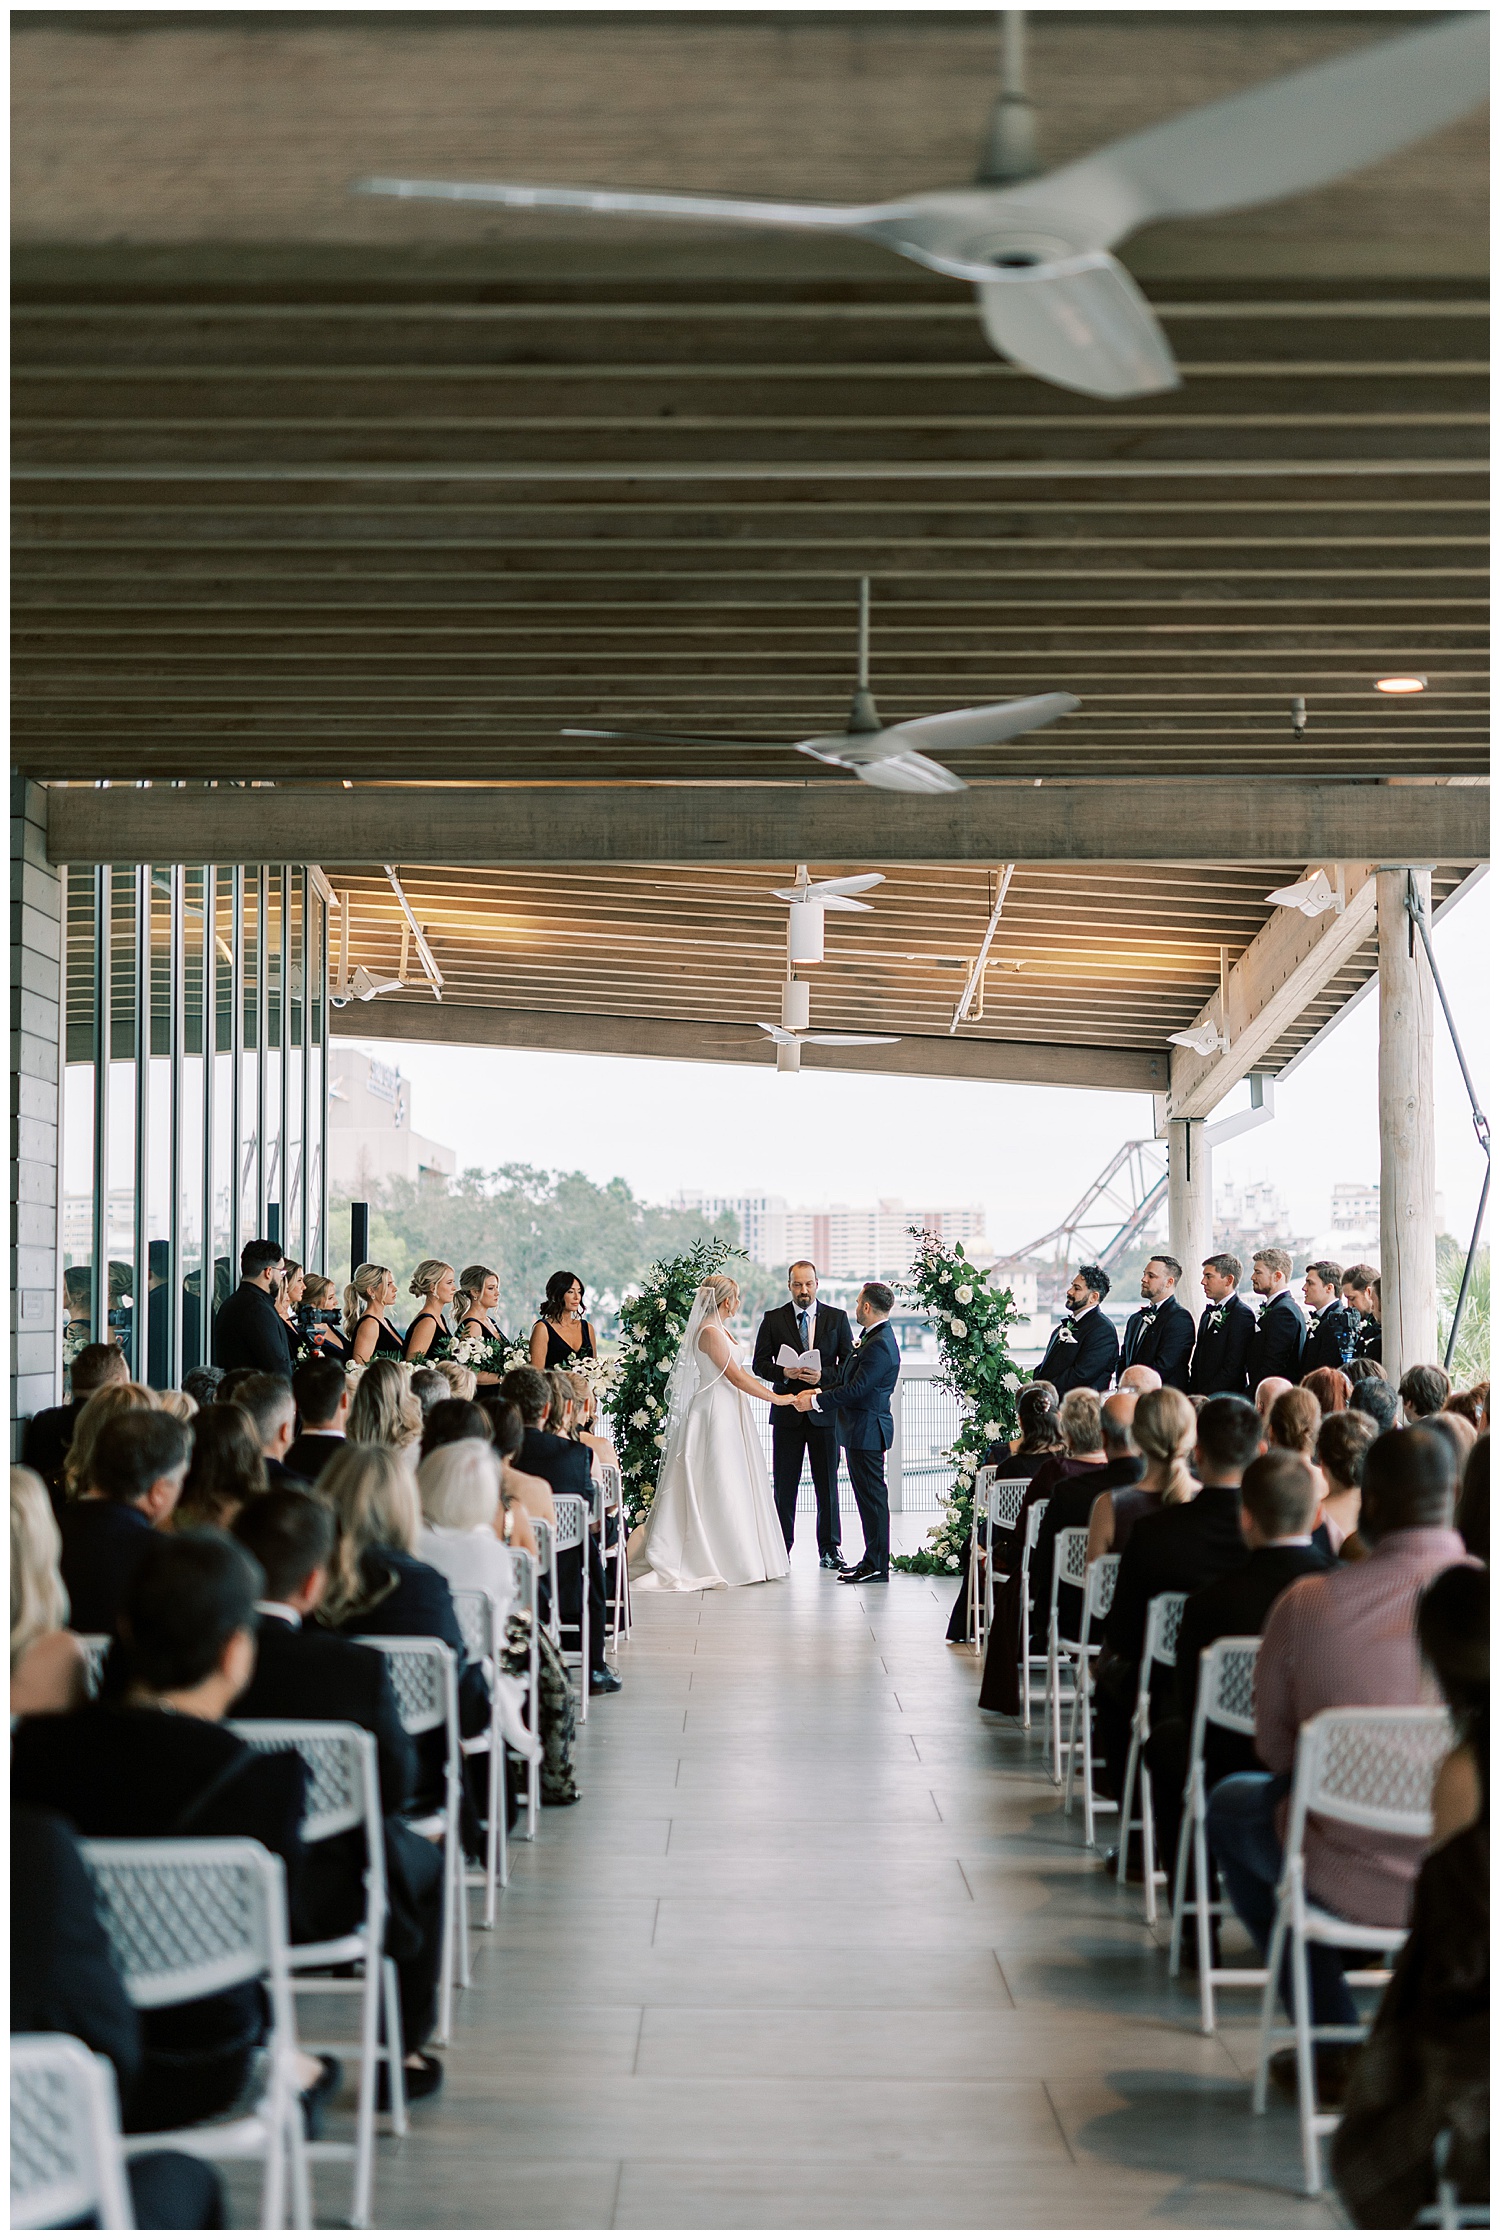 The Tampa River Center wedding